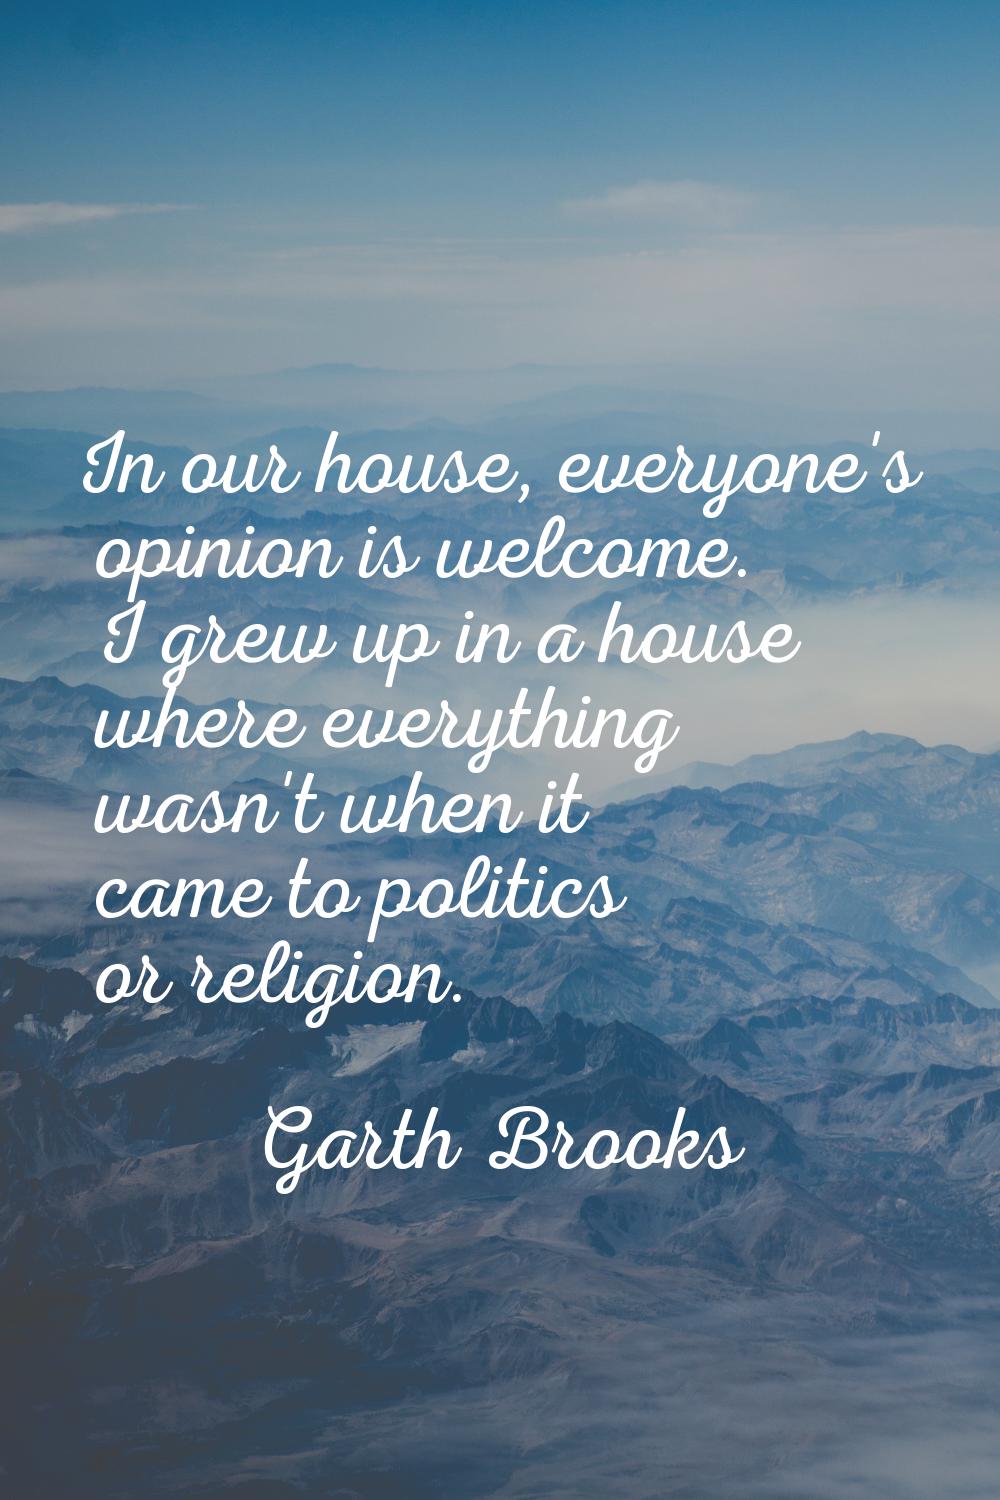 In our house, everyone's opinion is welcome. I grew up in a house where everything wasn't when it c